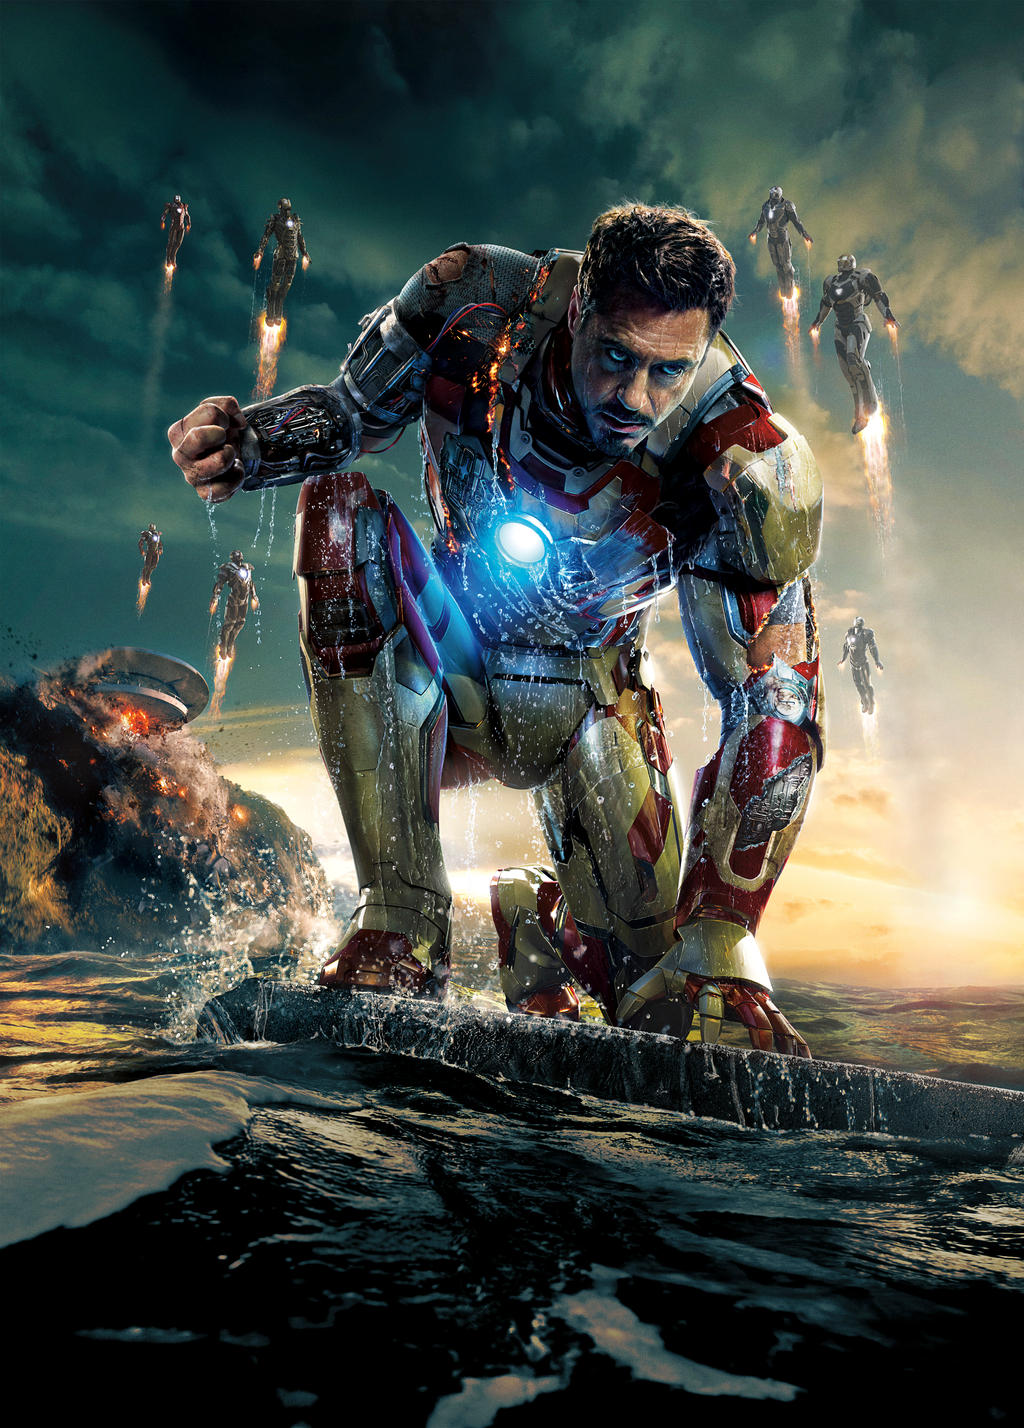 Iron Man 3 [Hi-Res Textless Poster] by ihaveanawesomename on DeviantArt